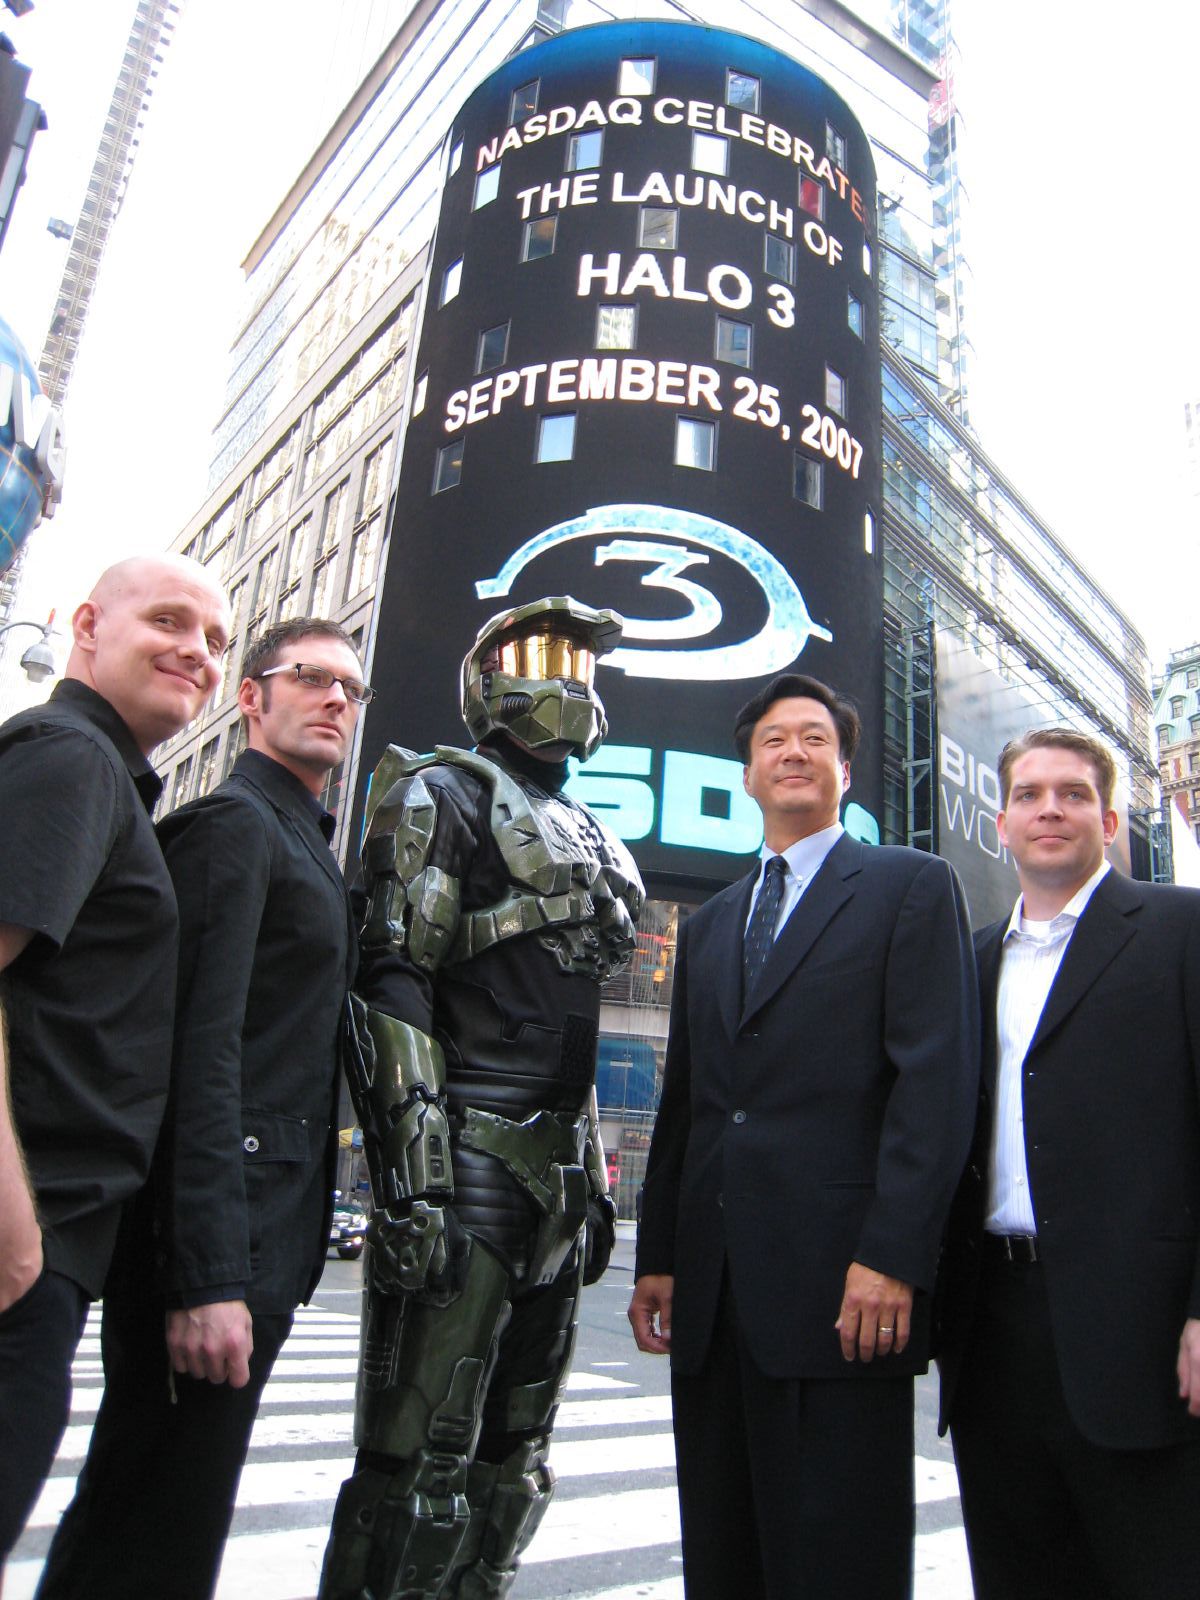 A picture of 'Master Chief' standing in front of the NASDAQ building to celebrate the launch of Halo 3.